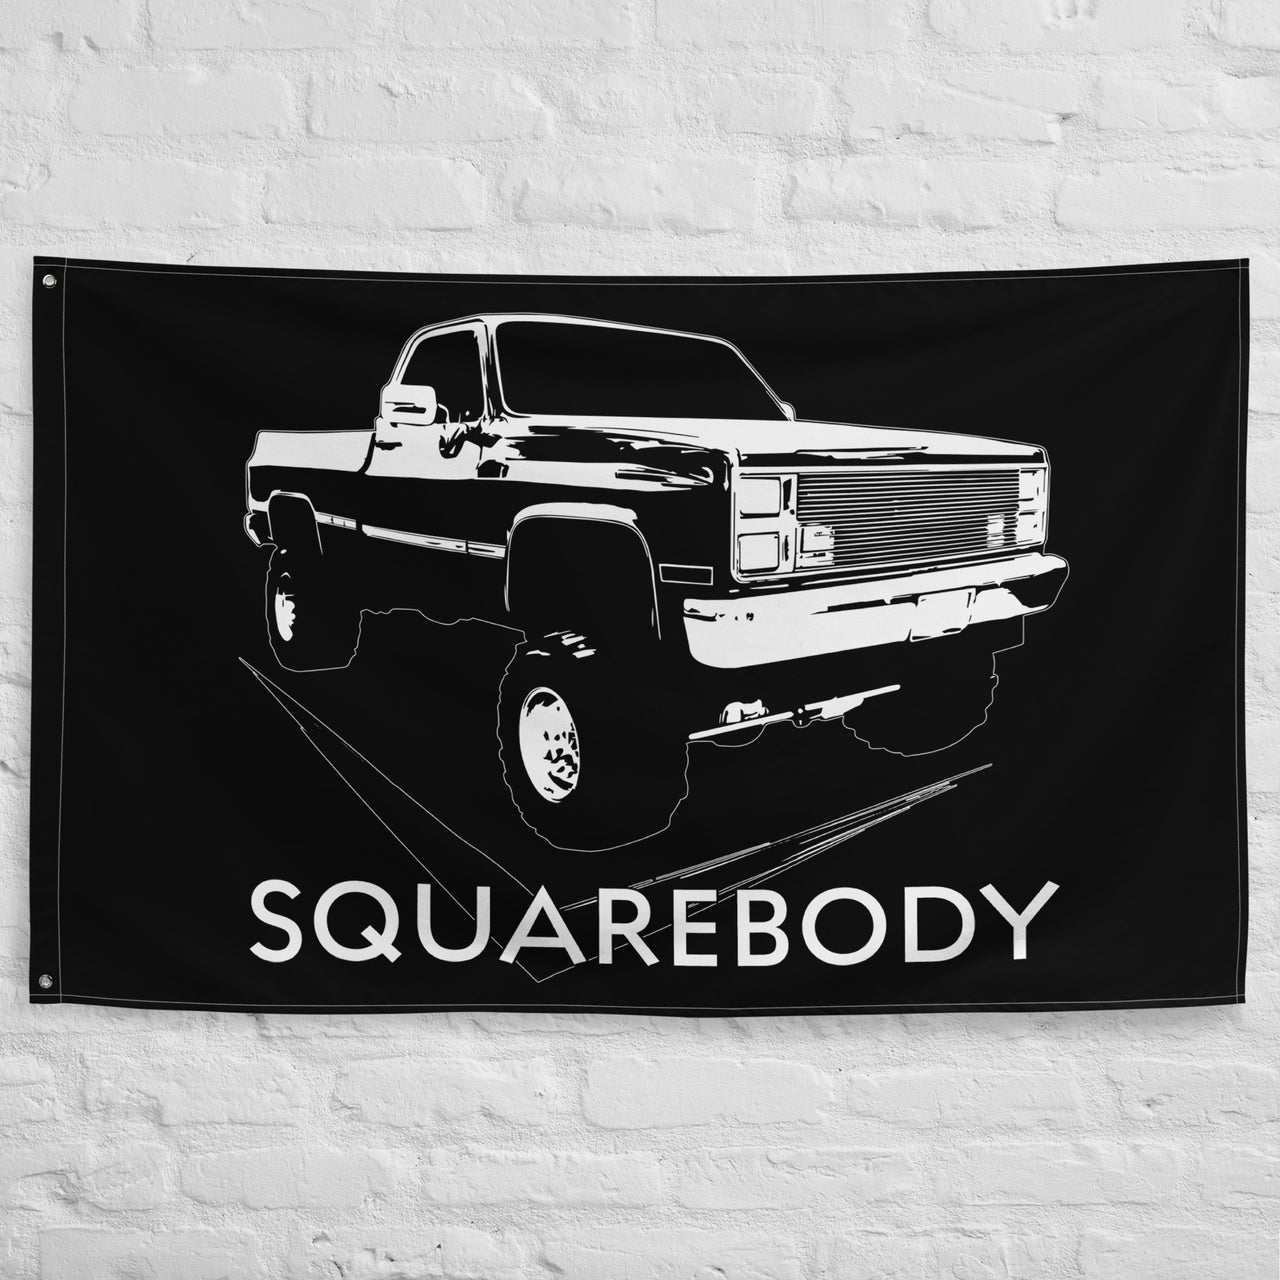 Square Body Lifted 80s Flag Truck hung on brick wall